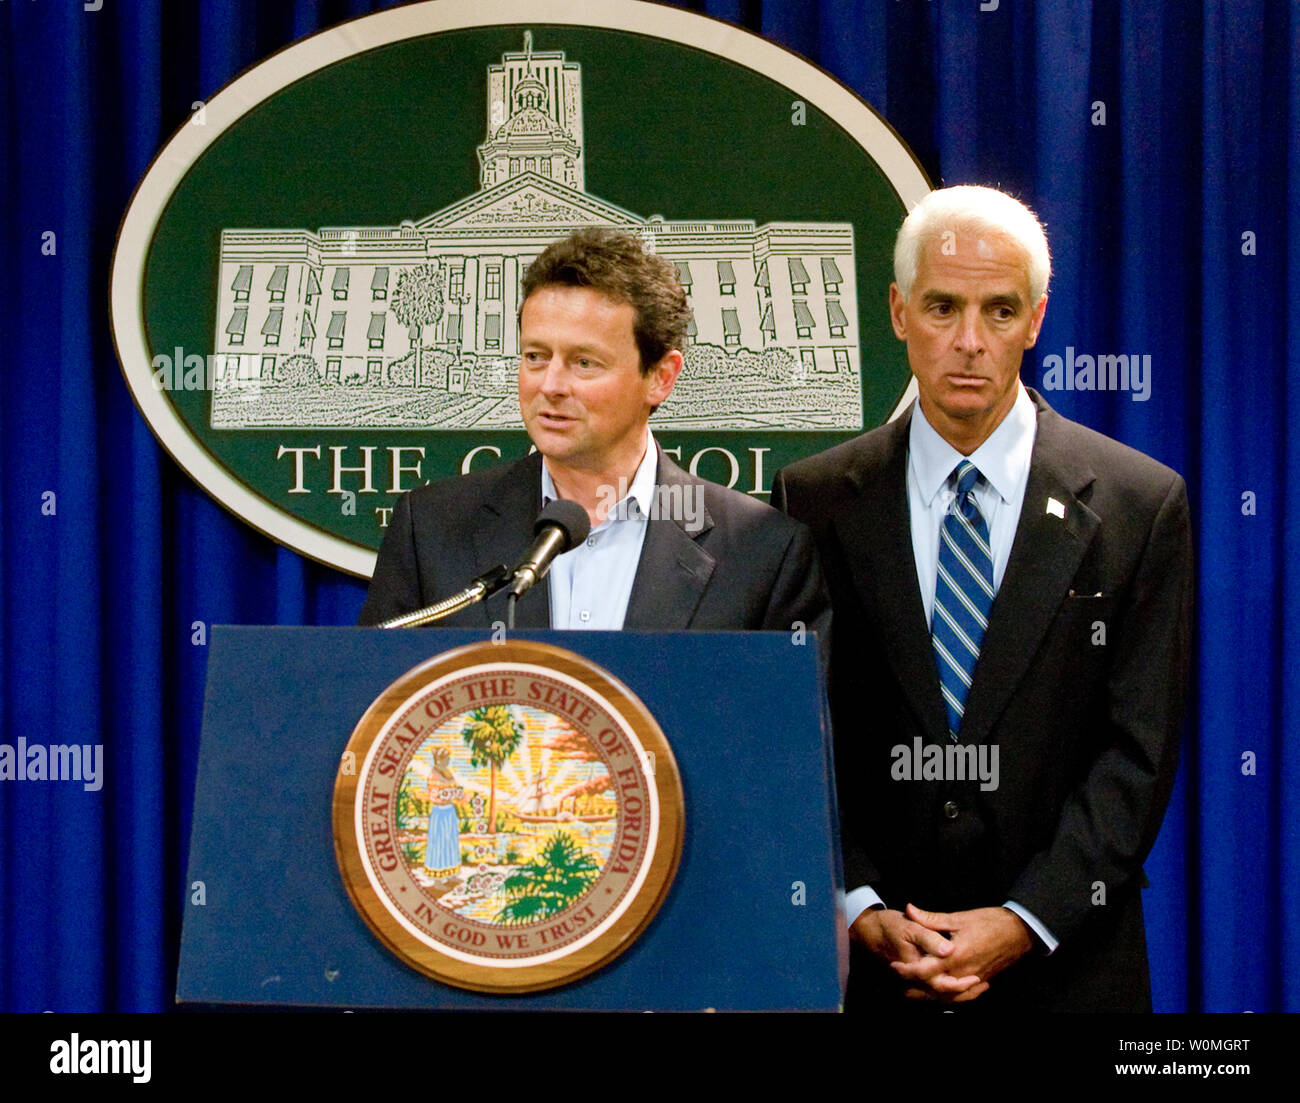 British Petroleum (BP) CEO Tony Hayward (L) and Florida Governor Charlie Crist address the press at the State House in Tallahassee, Florida on May 17, 2010. Hayward announced that BP would provide a $25 million grant to Florida to promote tourism. An explosion of the BP Deepwater Horizon oil rig on April 20 continues to spill oil into the Gulf. UPI/Joshua Drake/BP Stock Photo